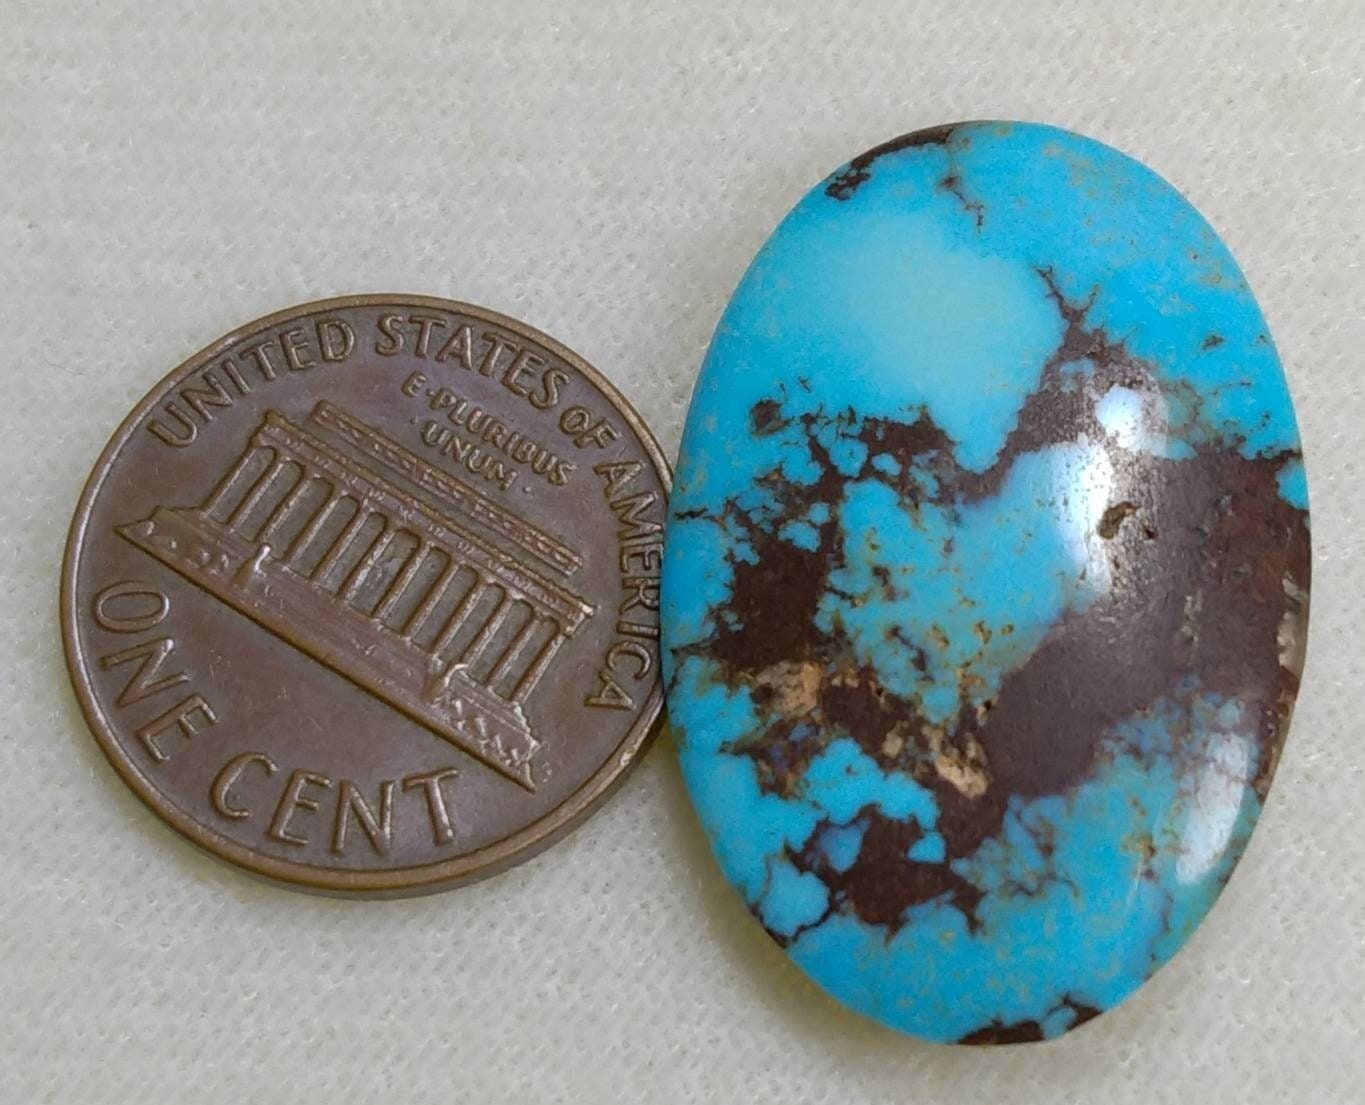 ARSAA GEMS AND MINERALSTop Quality and natural 19 carats beautiful Egyptian turquoise cabochon - Premium  from ARSAA GEMS AND MINERALS - Just $25.00! Shop now at ARSAA GEMS AND MINERALS